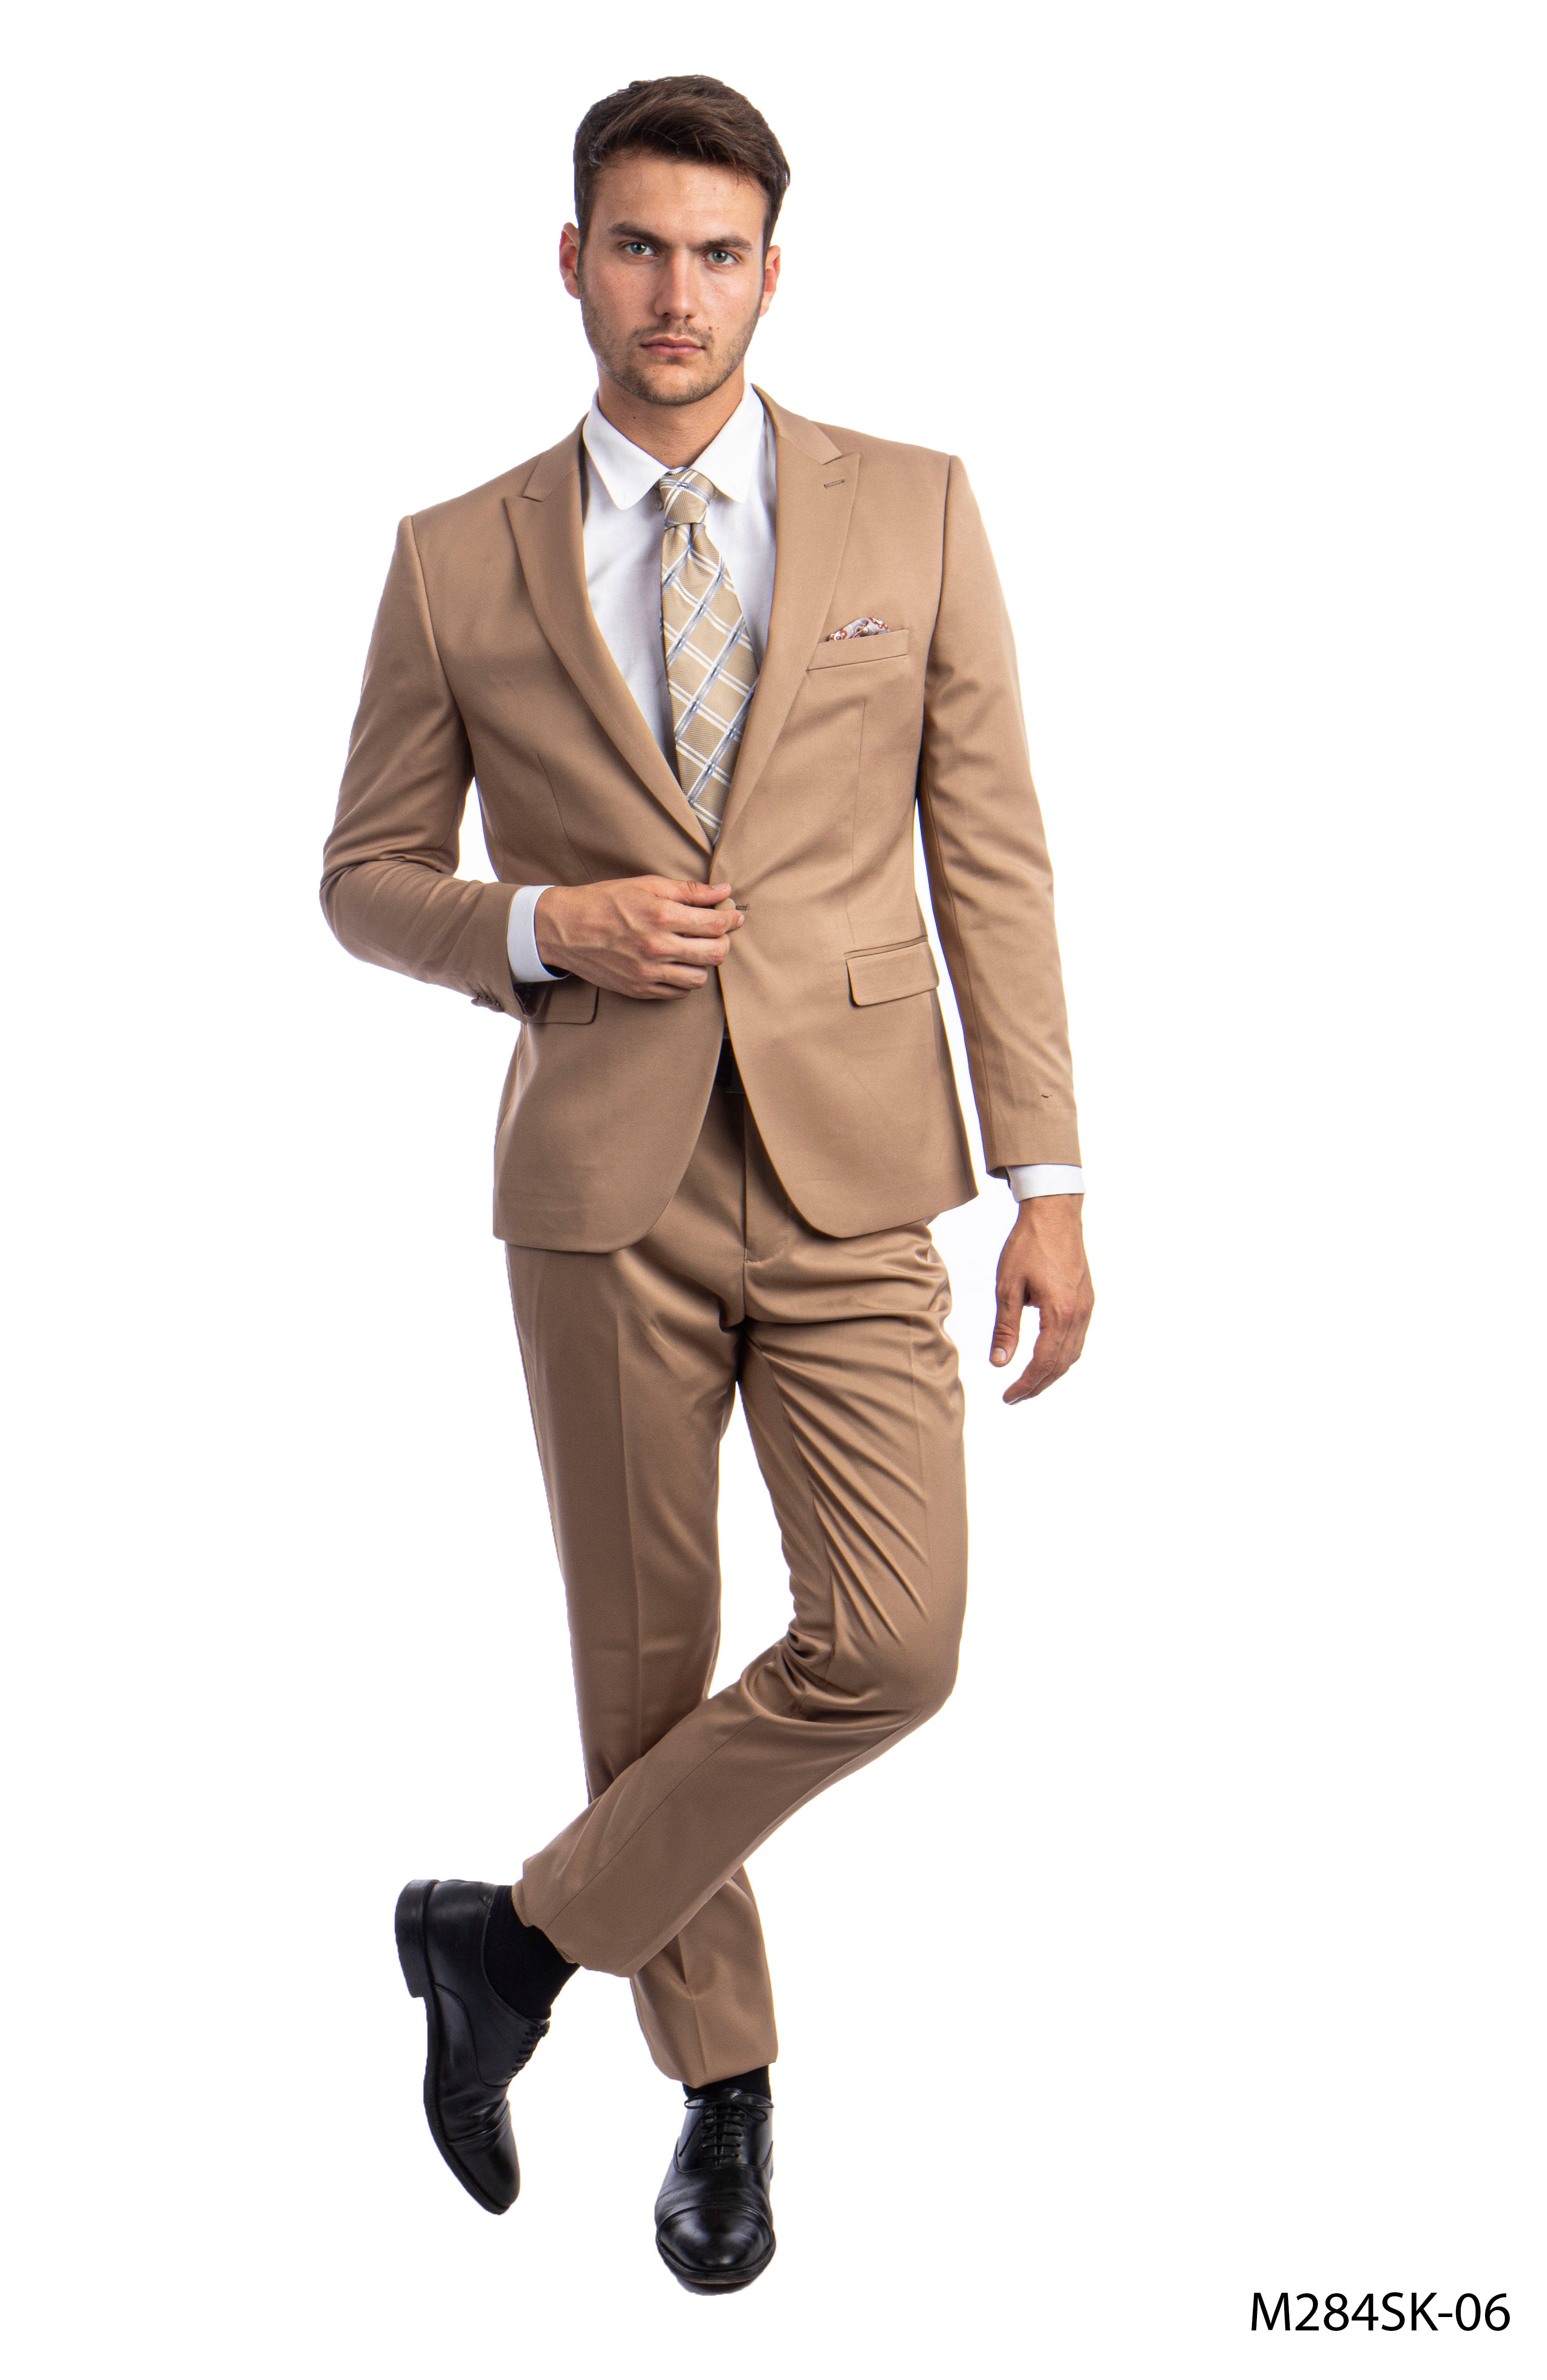 title:Sean Alexander Dk.Taupe 2 PC Solid Suit Skinny Fit Suits;color:Dk.Taupe